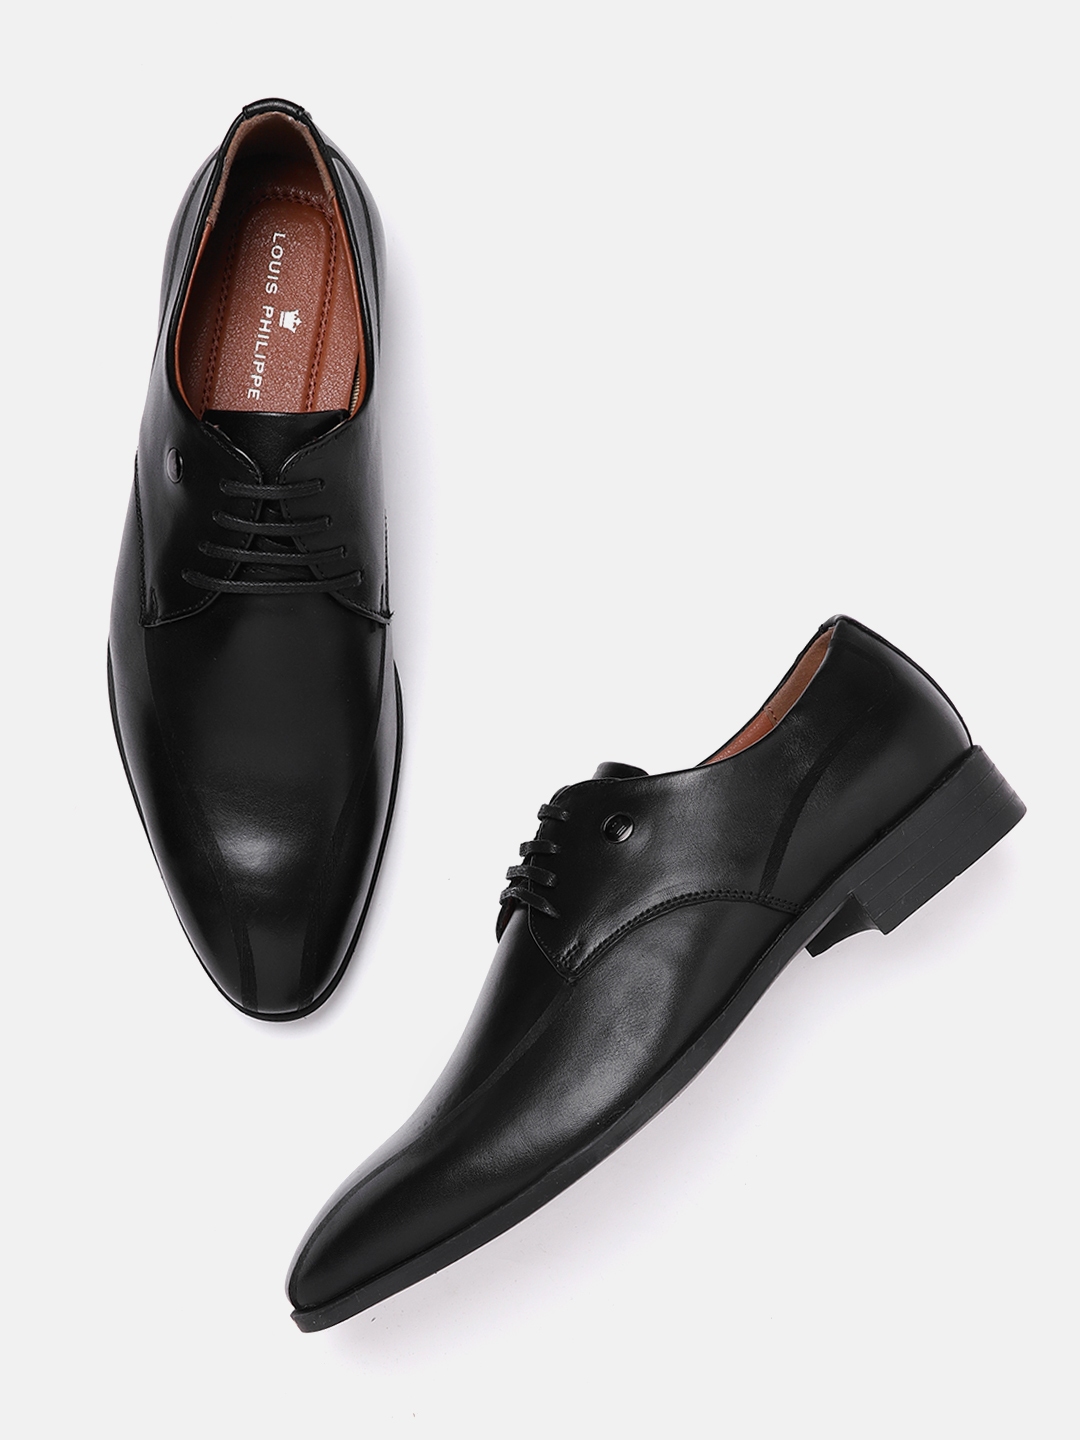 Buy Louis Philippe Men's Black Leather Formal Shoes - 9 UK/India